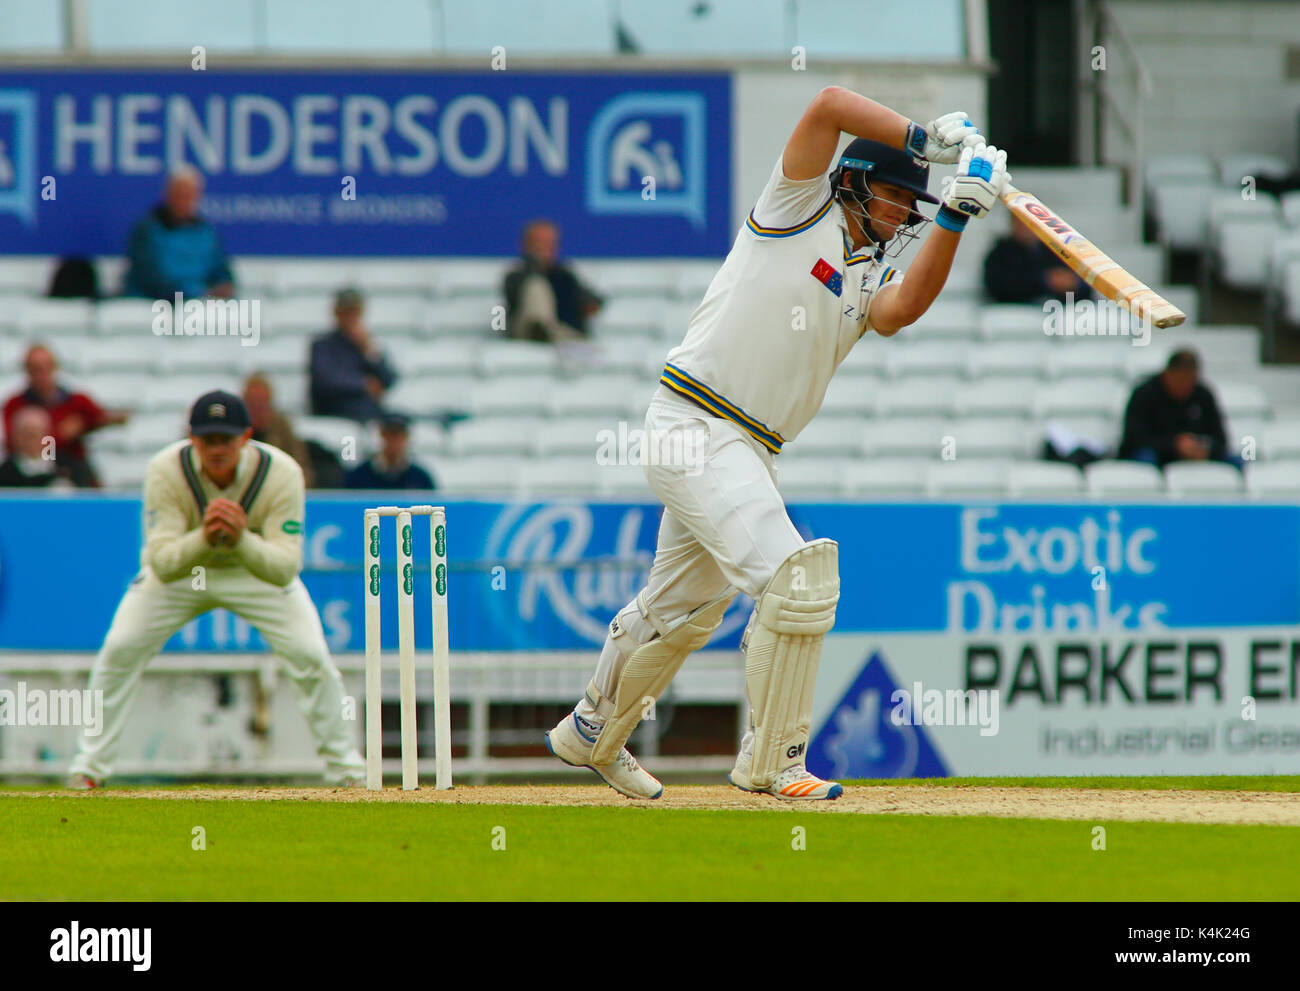 Leeds, UK. 6th Sep, 2017. Alex Lees Batting for Yorkshire CCC vs Middlesex CCC during the Specsavers County Championship Match at Headingley Carneige Stadium, Leeds.  06/09/2017 Credit: Stephen Gaunt/Alamy Live News Stock Photo